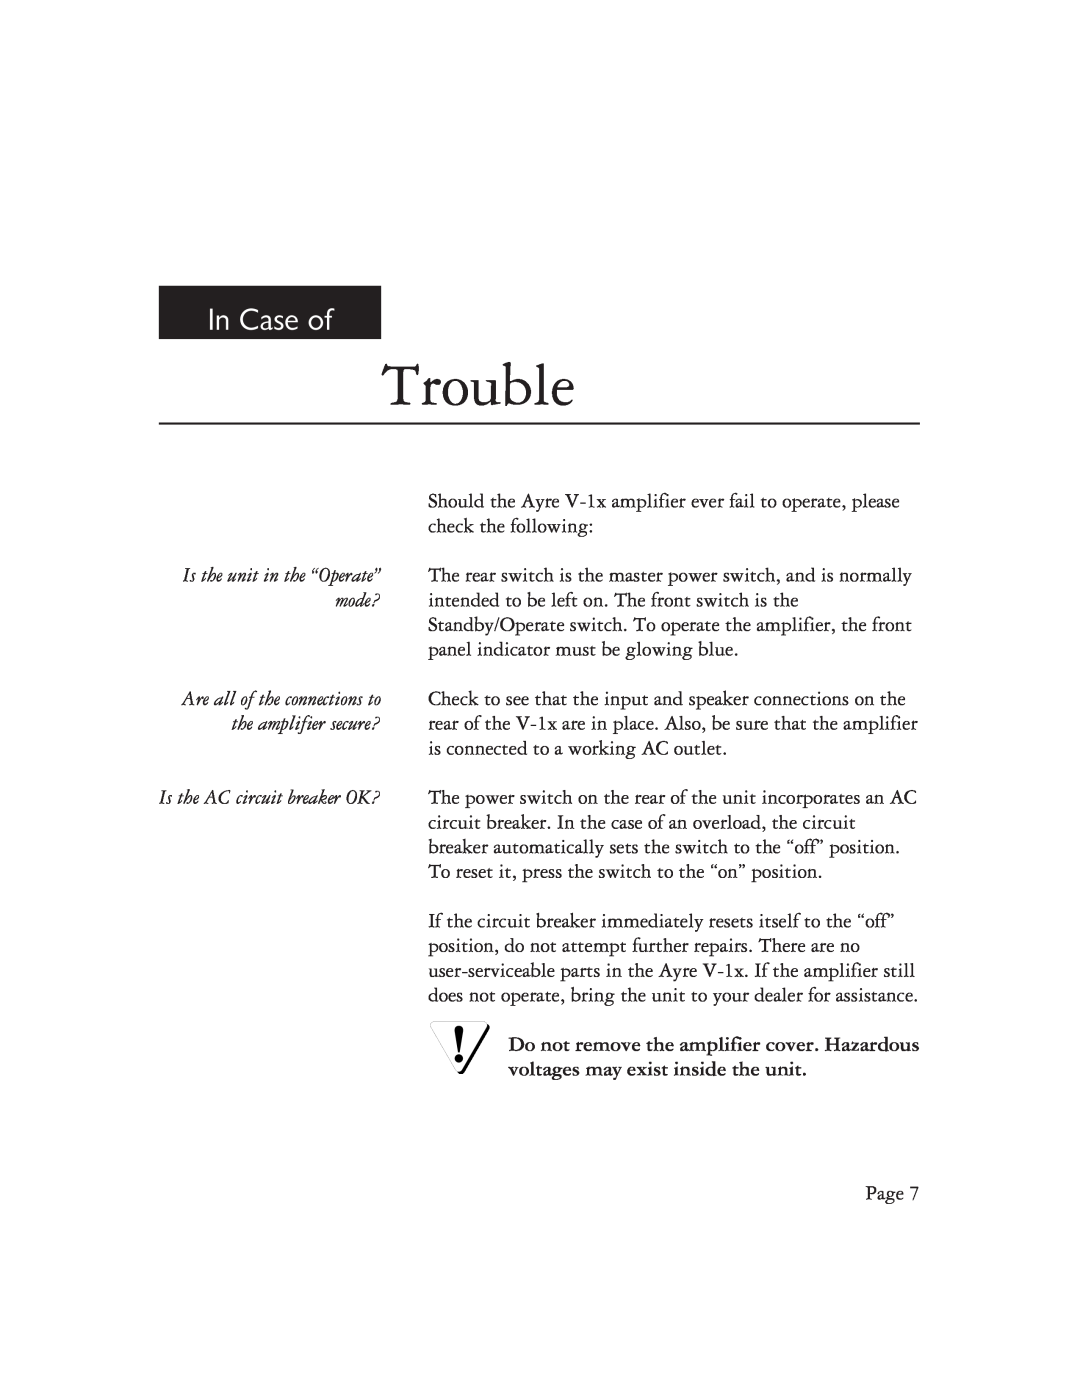 Ayre Acoustics V-1x owner manual Trouble, In Case of 